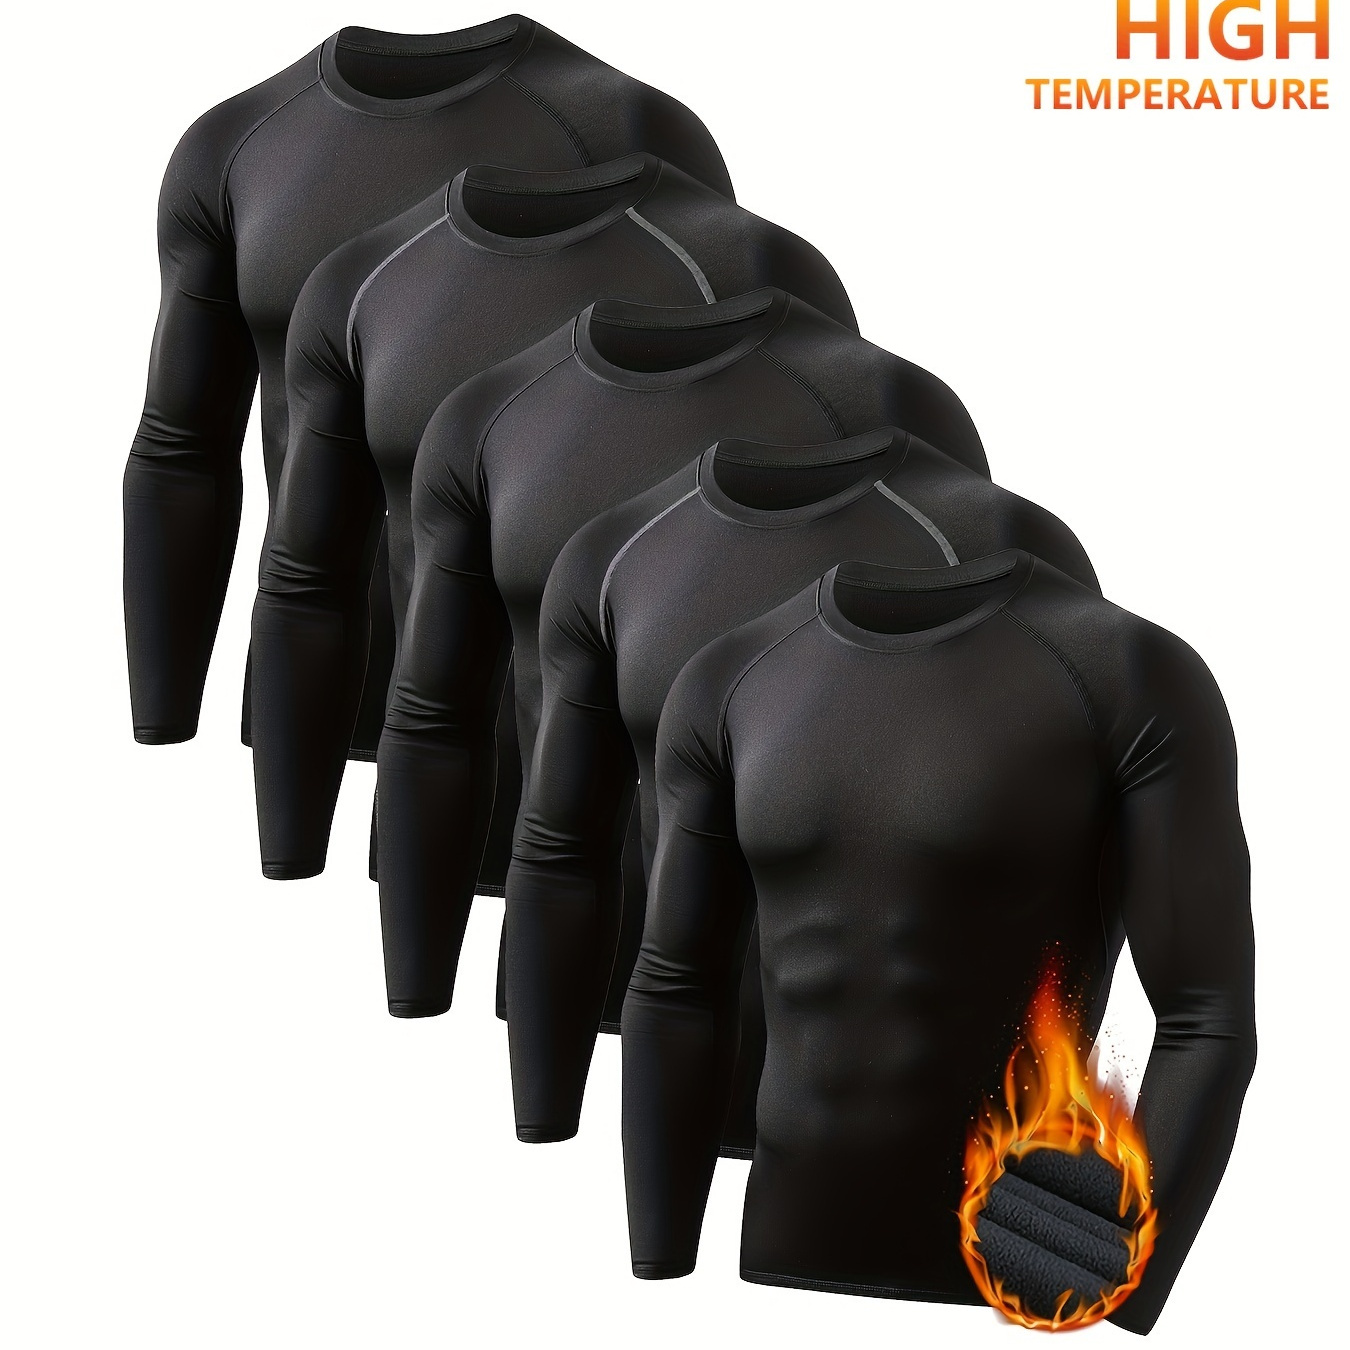 

5 Pack Men's Thermal Compression Shirt Fleece Lined Long Sleeve Athletic Base Layer Cold Weather Gear Workout Top